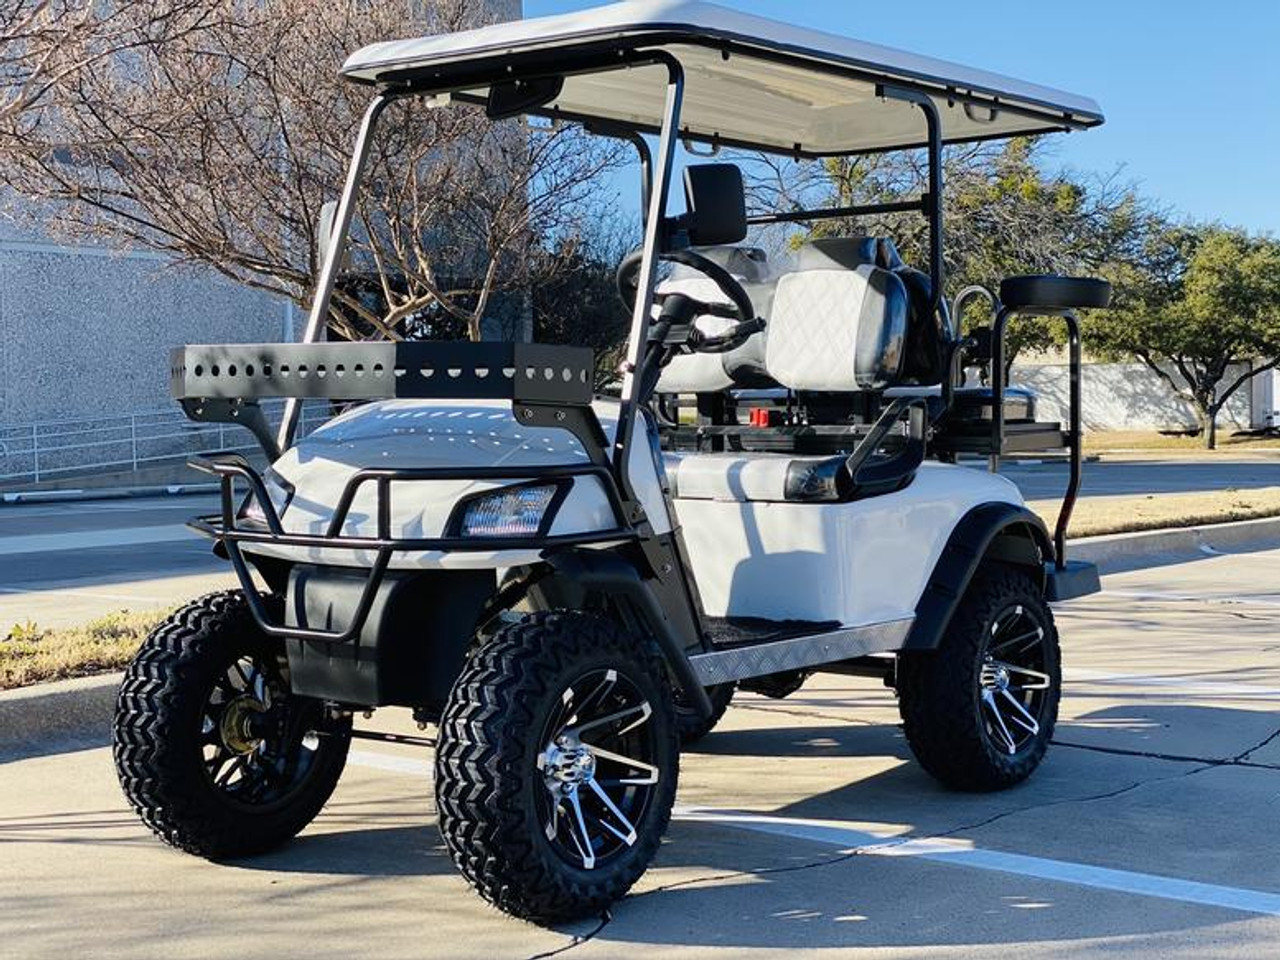 DYNAMIC ENFORCER GOLF CART WHITE - FULLY ASSEMBLED AND TESTED 4 SEATER (FRONT SIDE VIEW)